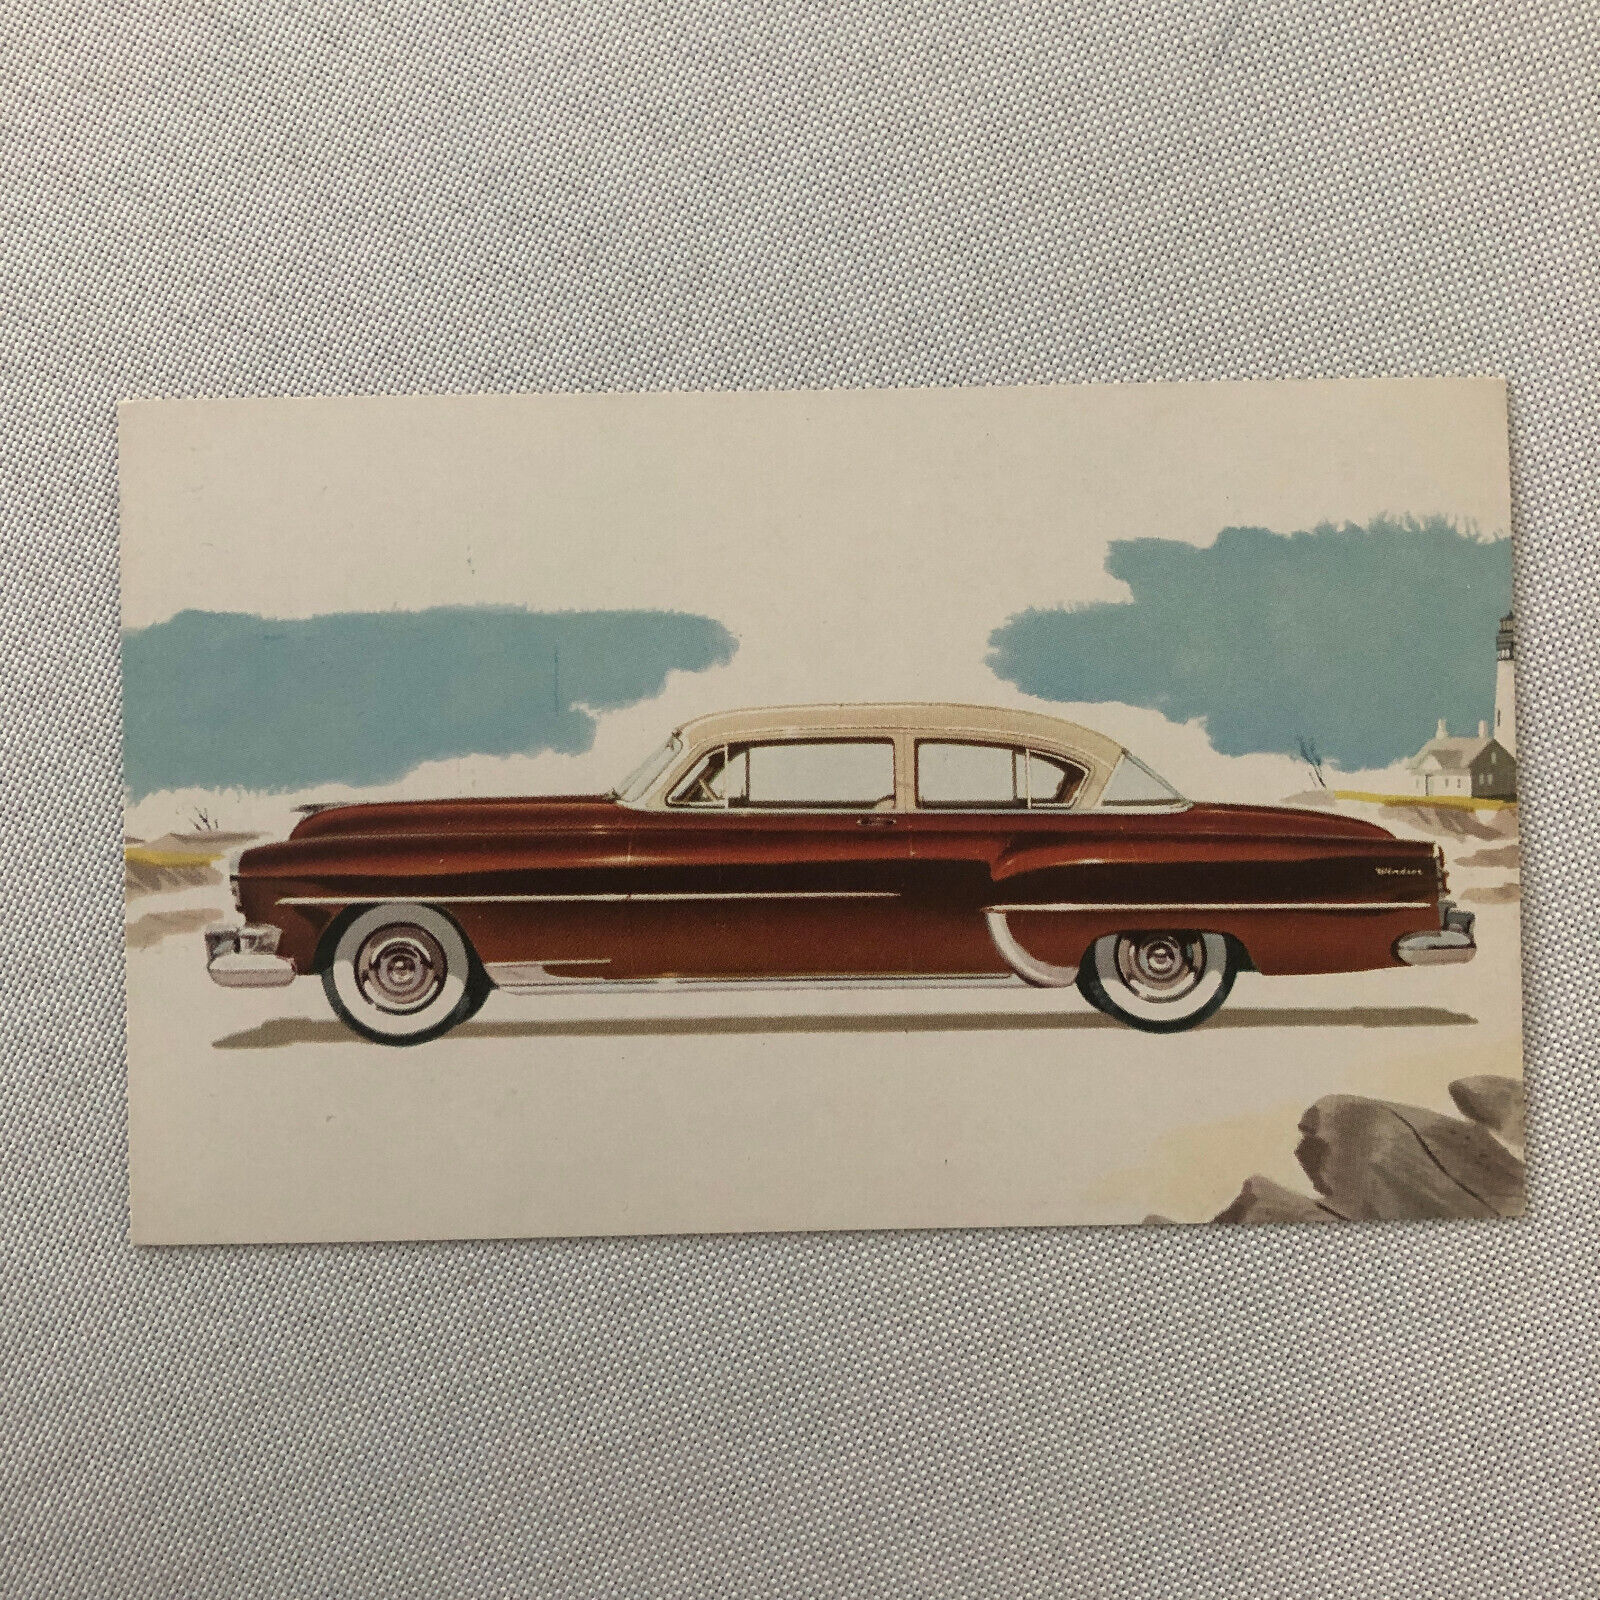 1954 Chrysler Windsor Deluxe Club Coupe Postcard Post Card Advertising